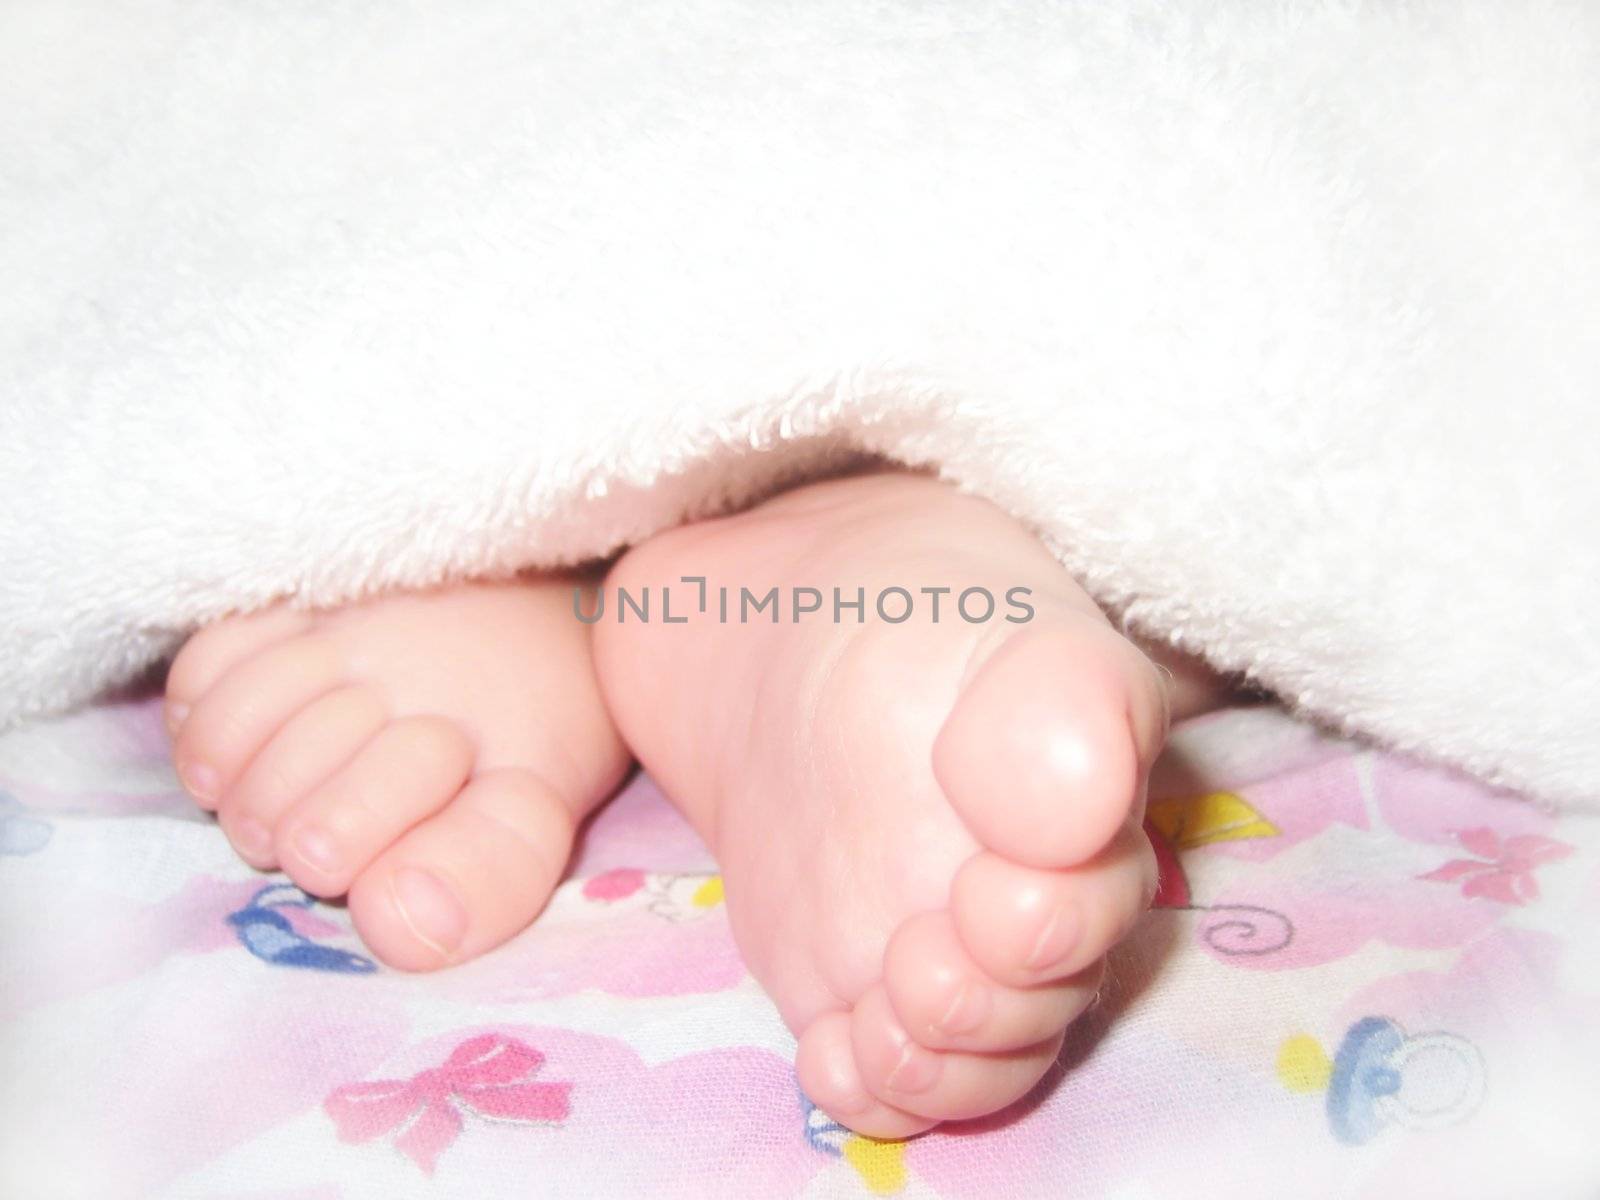 Children's legs looking out from under a white blanket